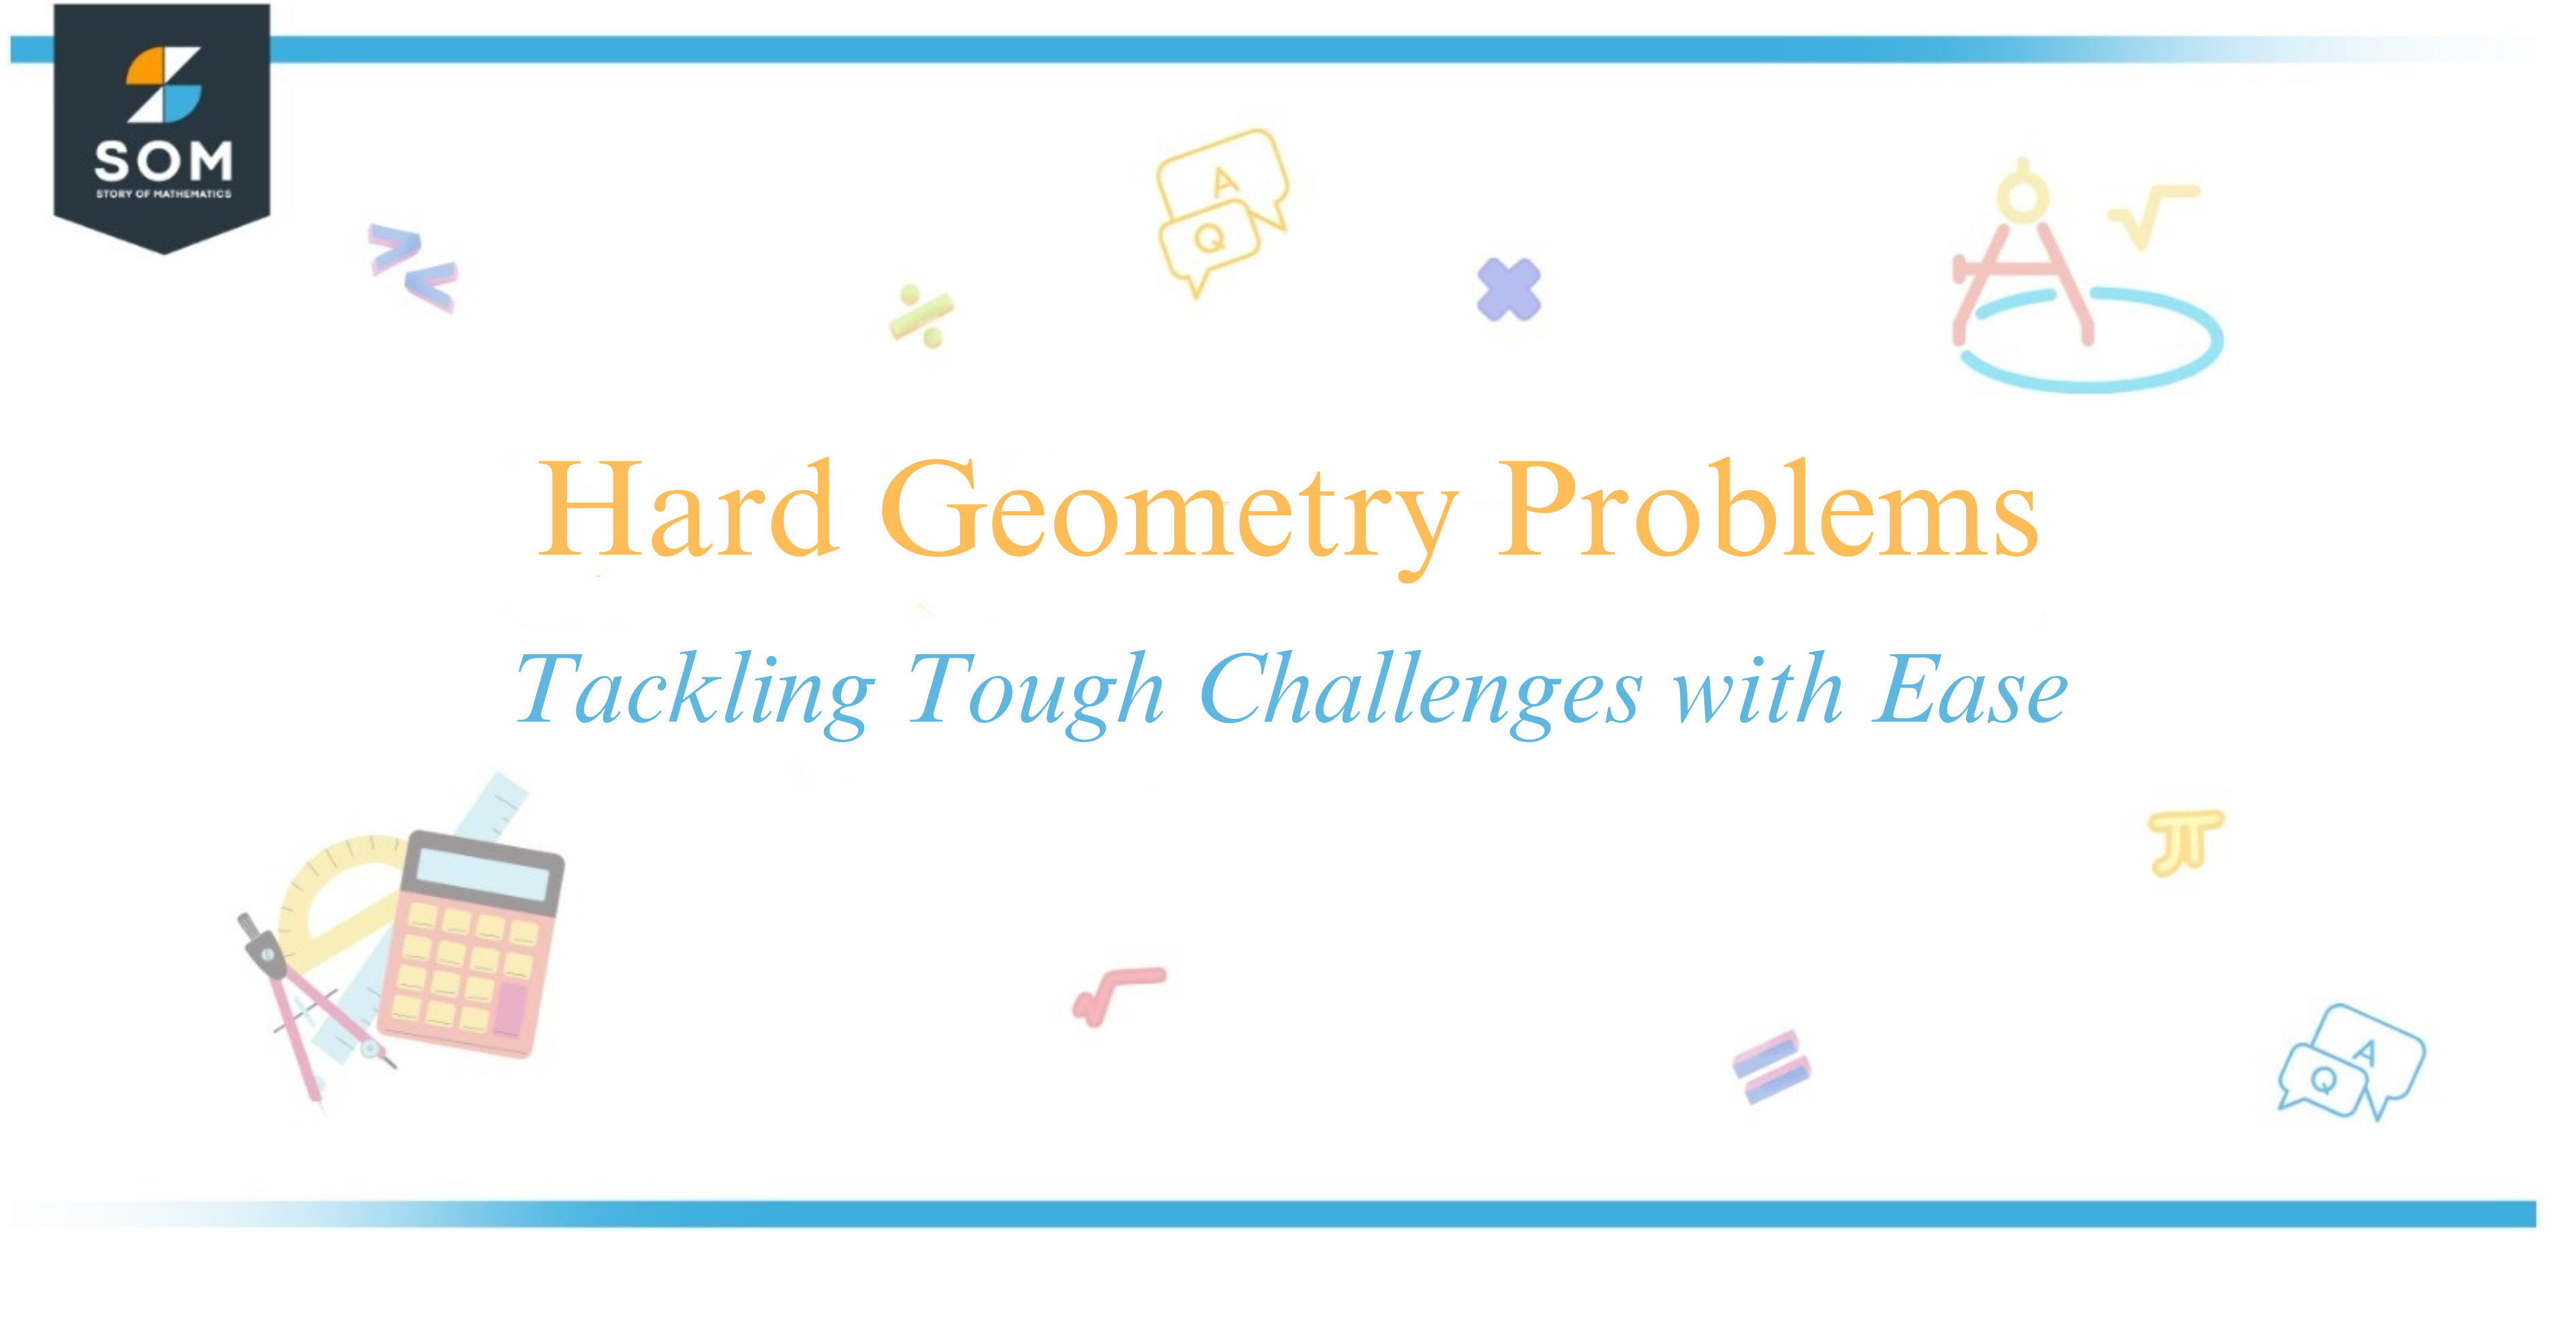 Hard Geometry Problems Tackling Tough Challenges with Ease